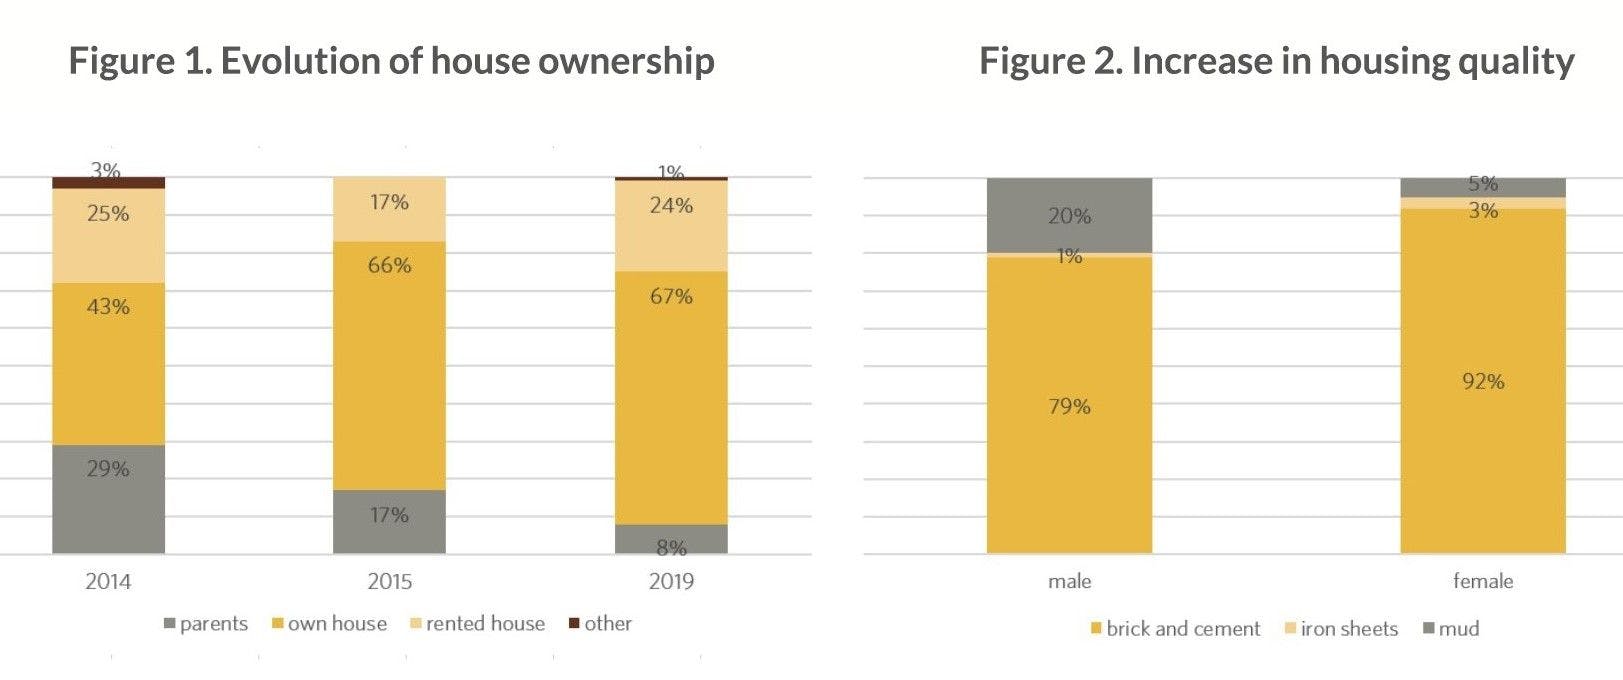 Evolution of house ownership and increase in housing quality